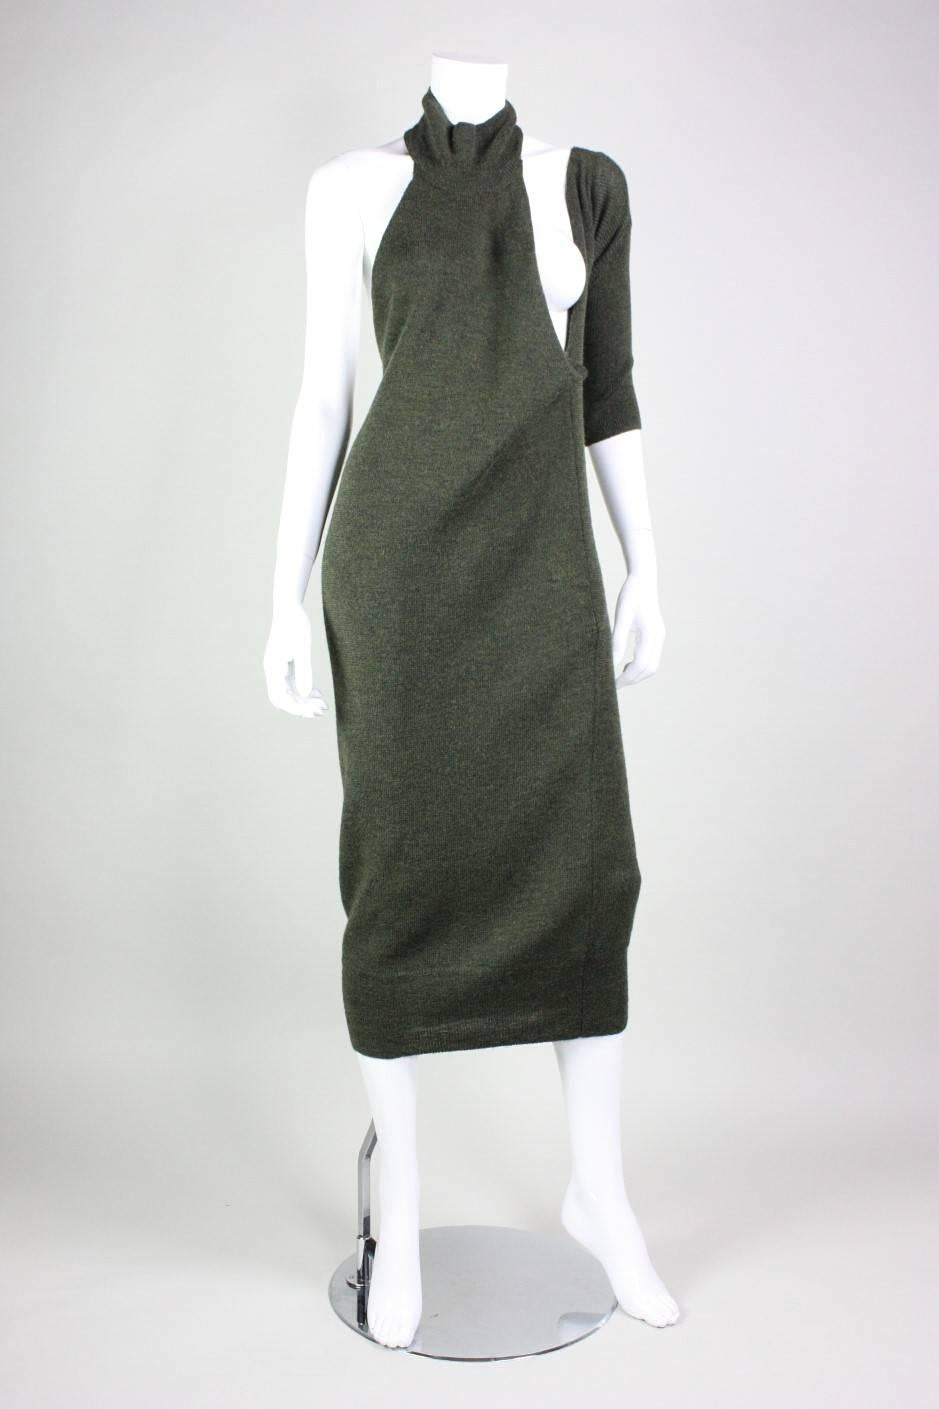 Unusual sweater dress from Yohji Yamamoto is made of a muted green wool.  It features one sleeve, and exposed breast, and open back.  Tie at low center back.  No other closures.  Unlined.

Labeled size Small.

Measurements-
Bust: Open
Waist: